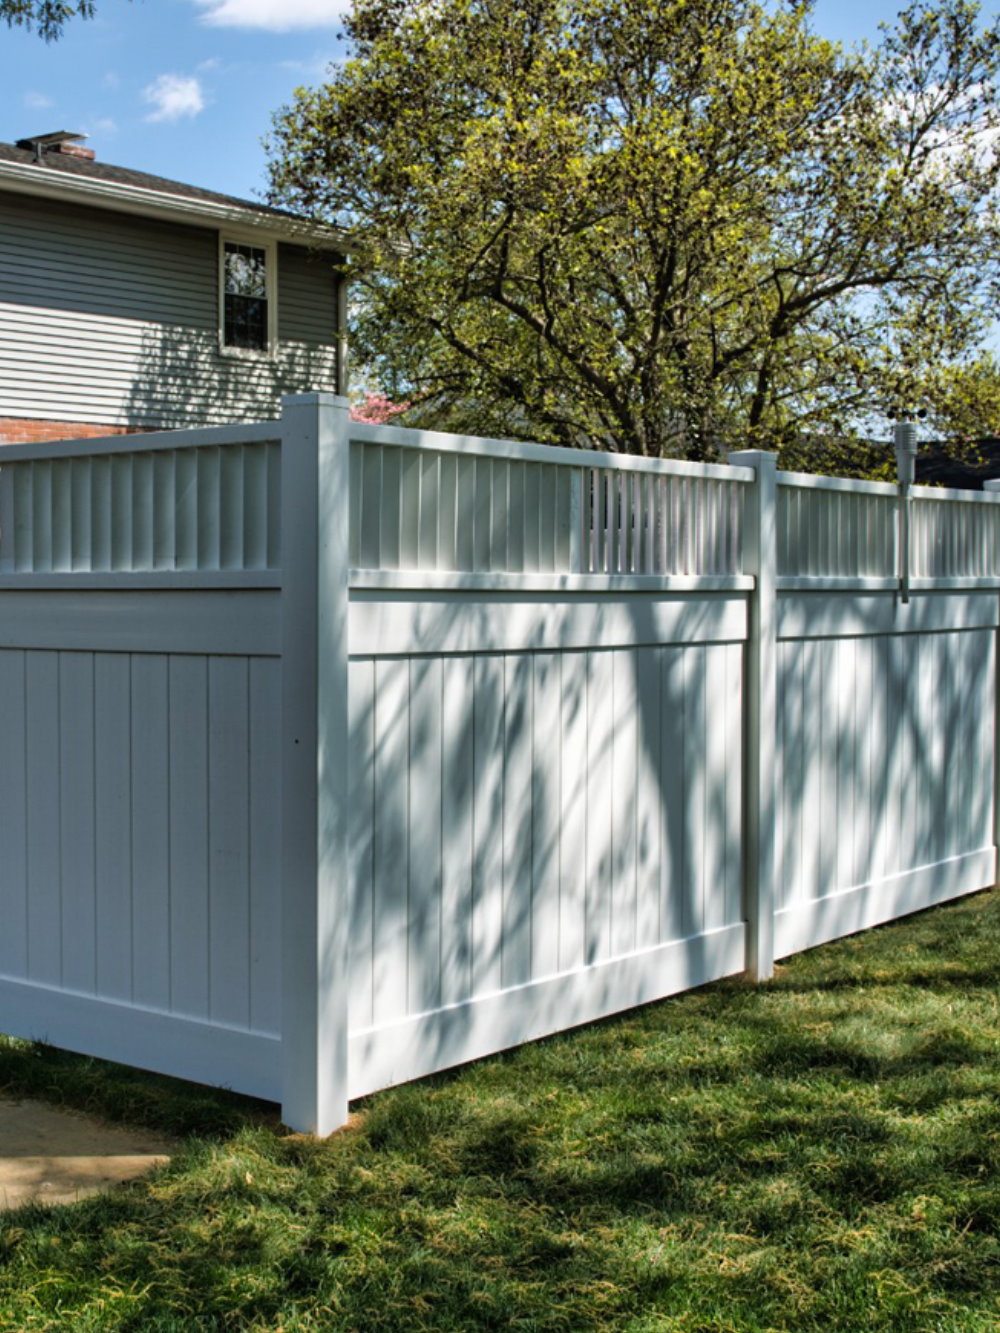 Types of fences we install in Fairfield IL